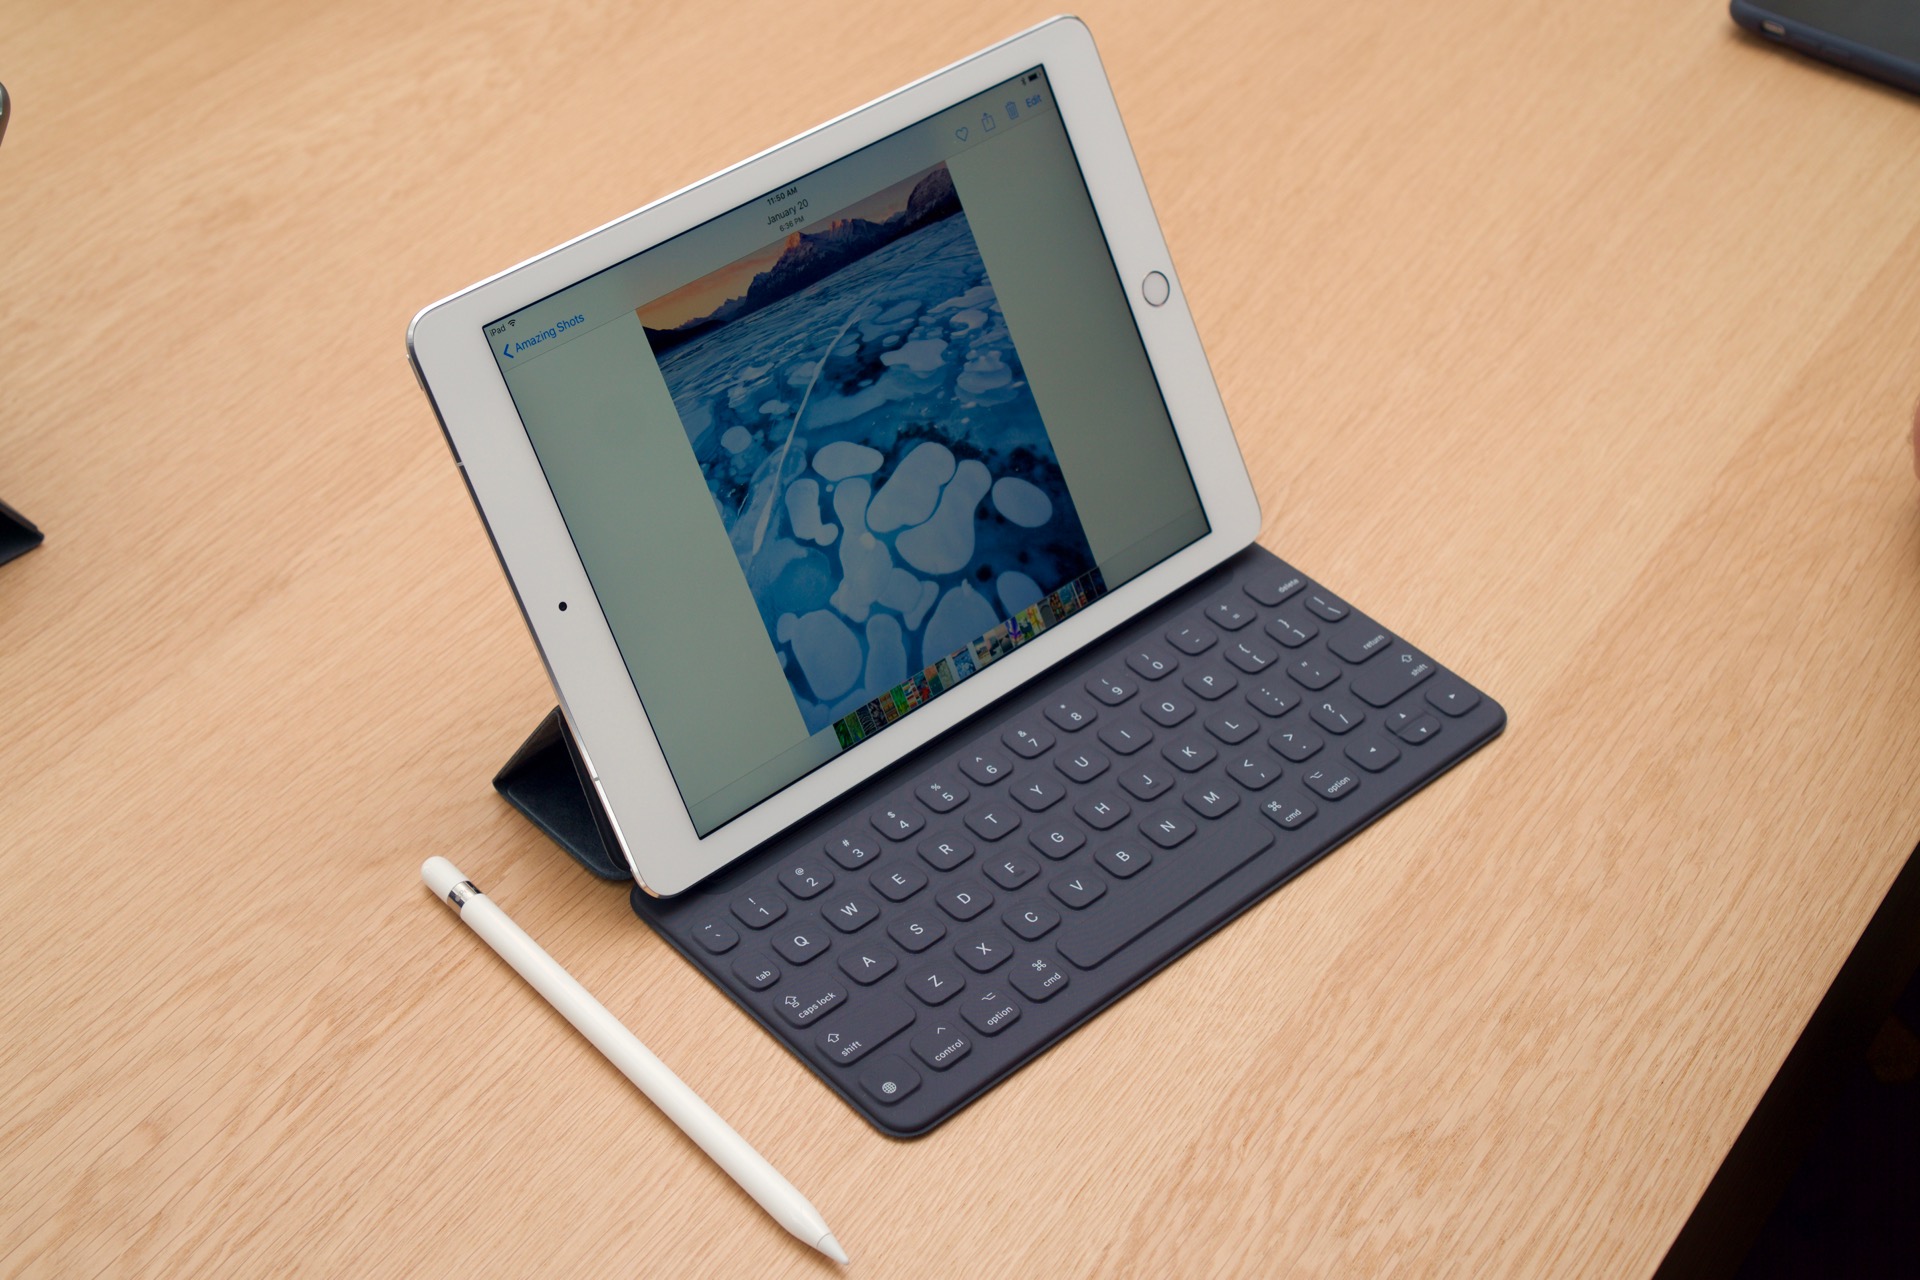 9.7-inch iPad Pro review: What makes something “Pro” anyway? | Ars Technica